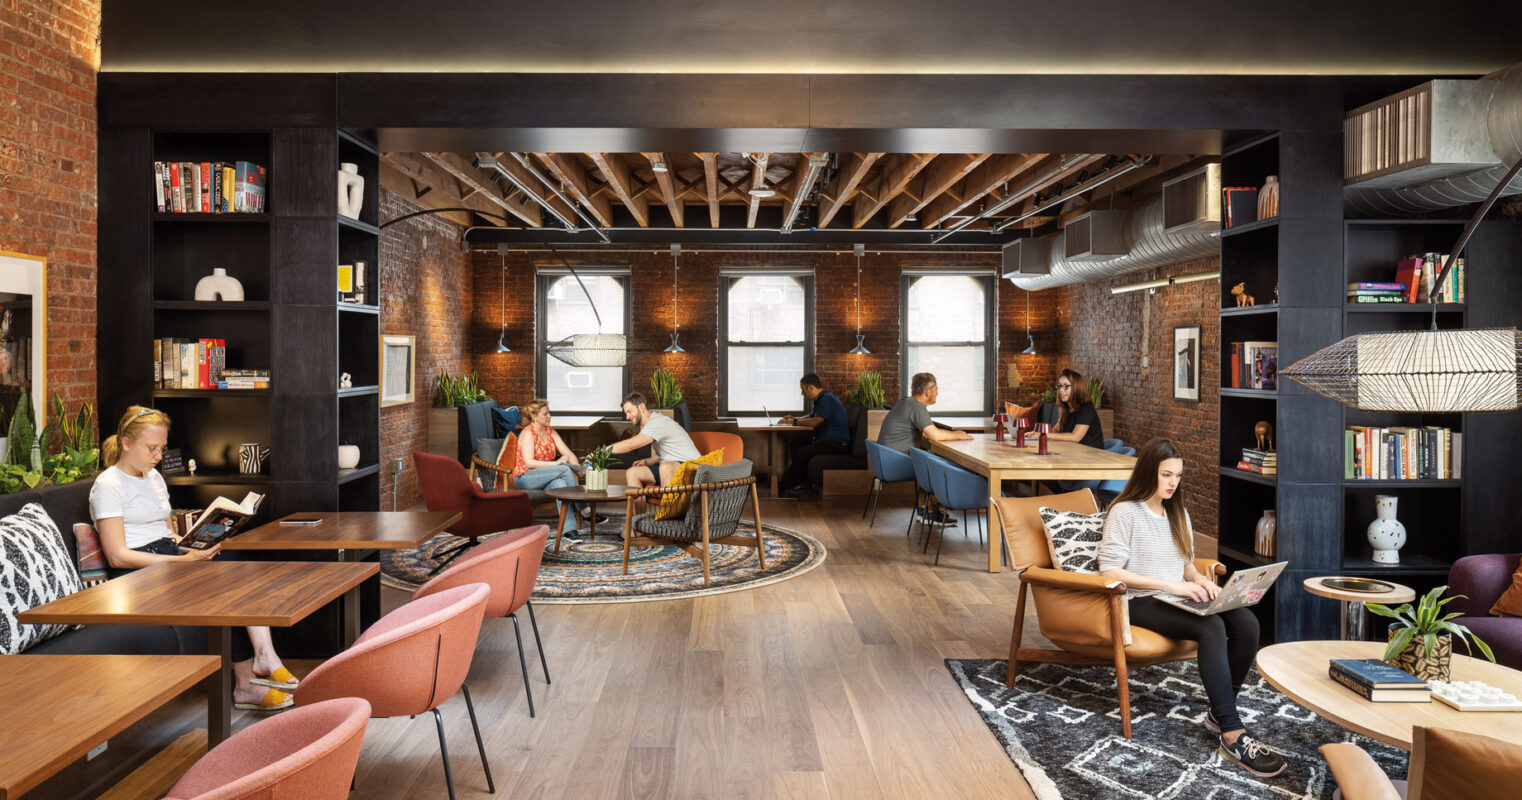 A modern, cozy co-working space bustling with professionals engaged in various activities, from working on laptops to reading, in a room with exposed brick walls, stylish furnishings, and warm lighting.